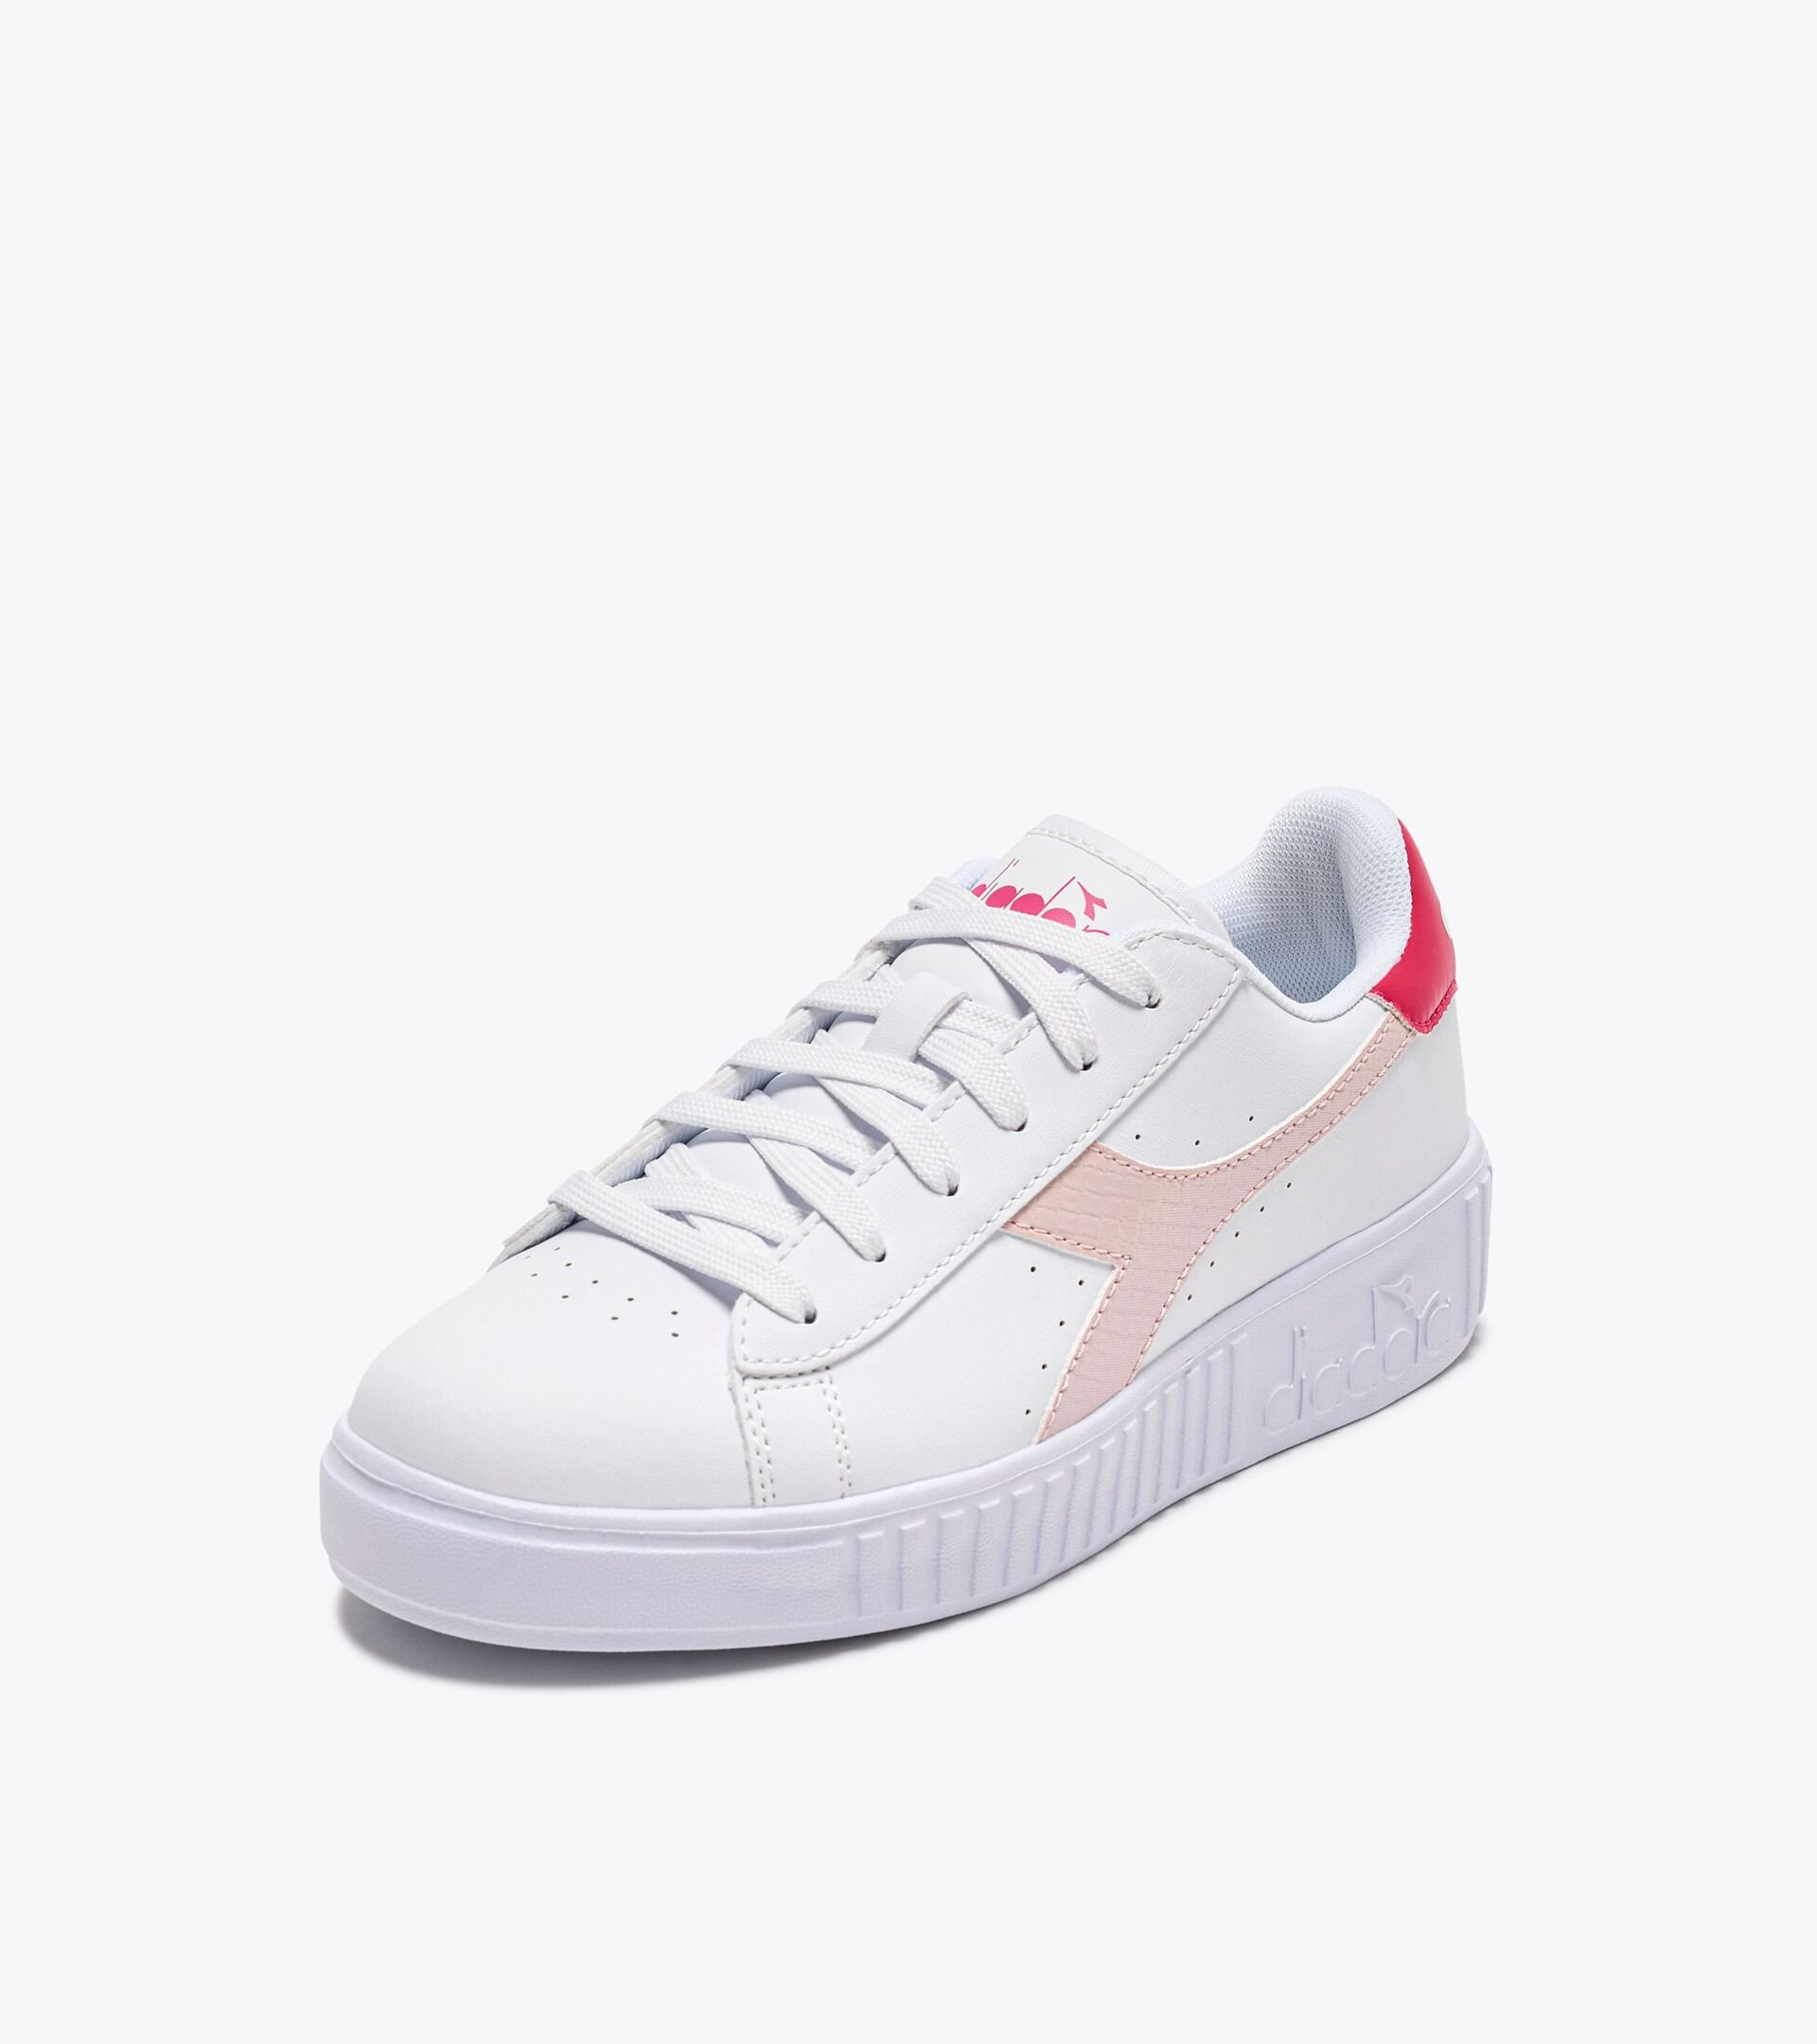 Sports shoes - Youth - 8-16 years
 GAME STEP GS GLAZED BEETROOT PINK - Diadora